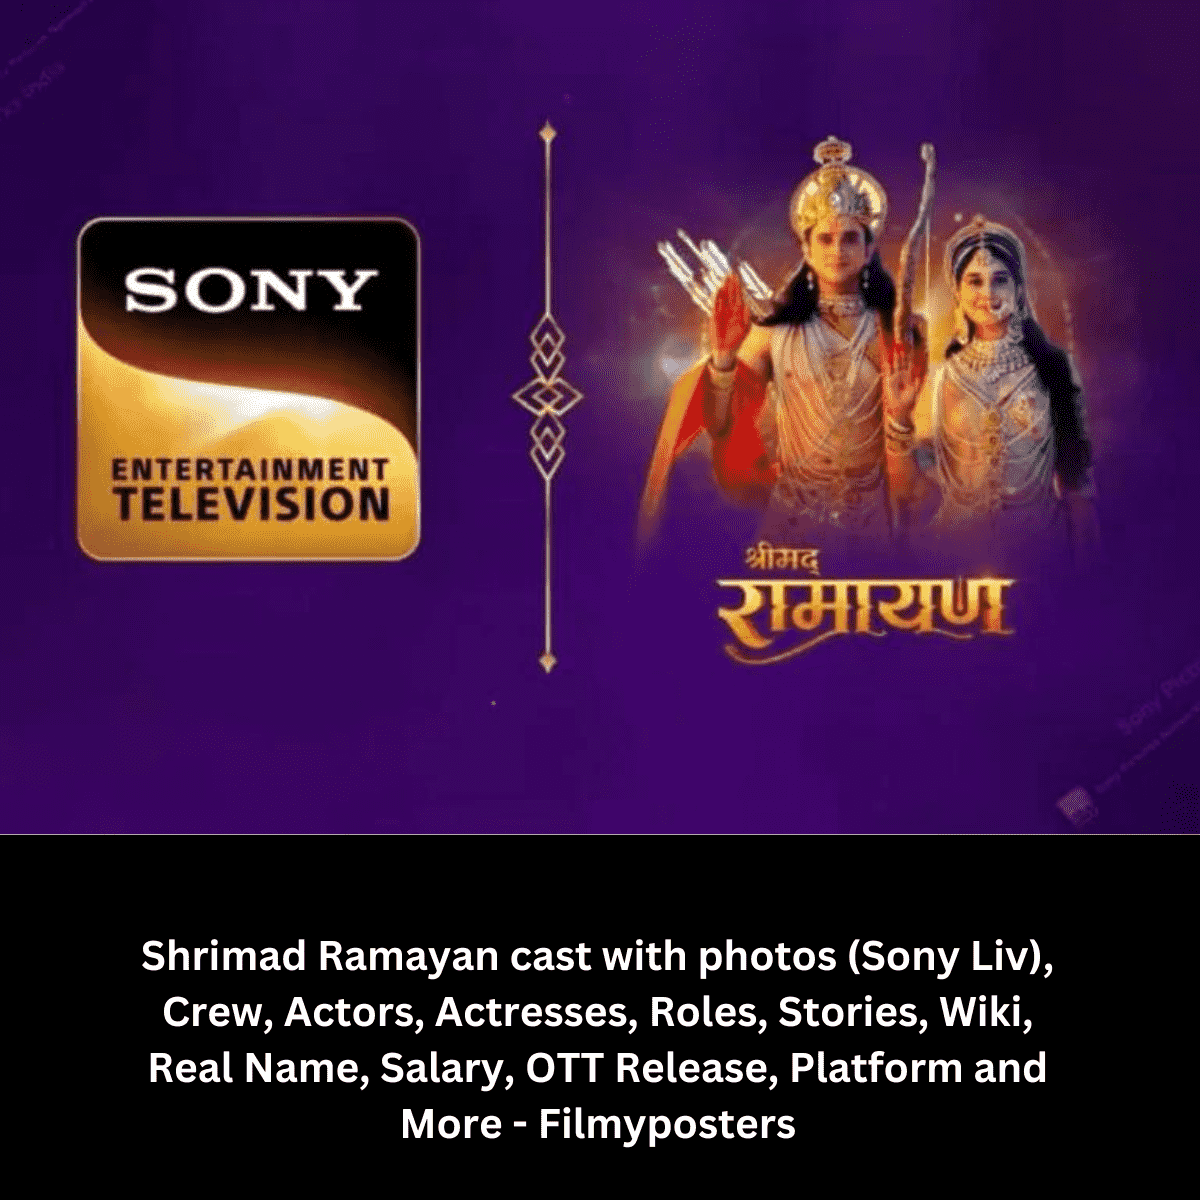 Shrimad Ramayan cast with photos (Sony Liv), Crew, Actors, Actresses, Roles, Stories, Wiki, Real Name, Salary, OTT Release, Platform and More - Filmyposters